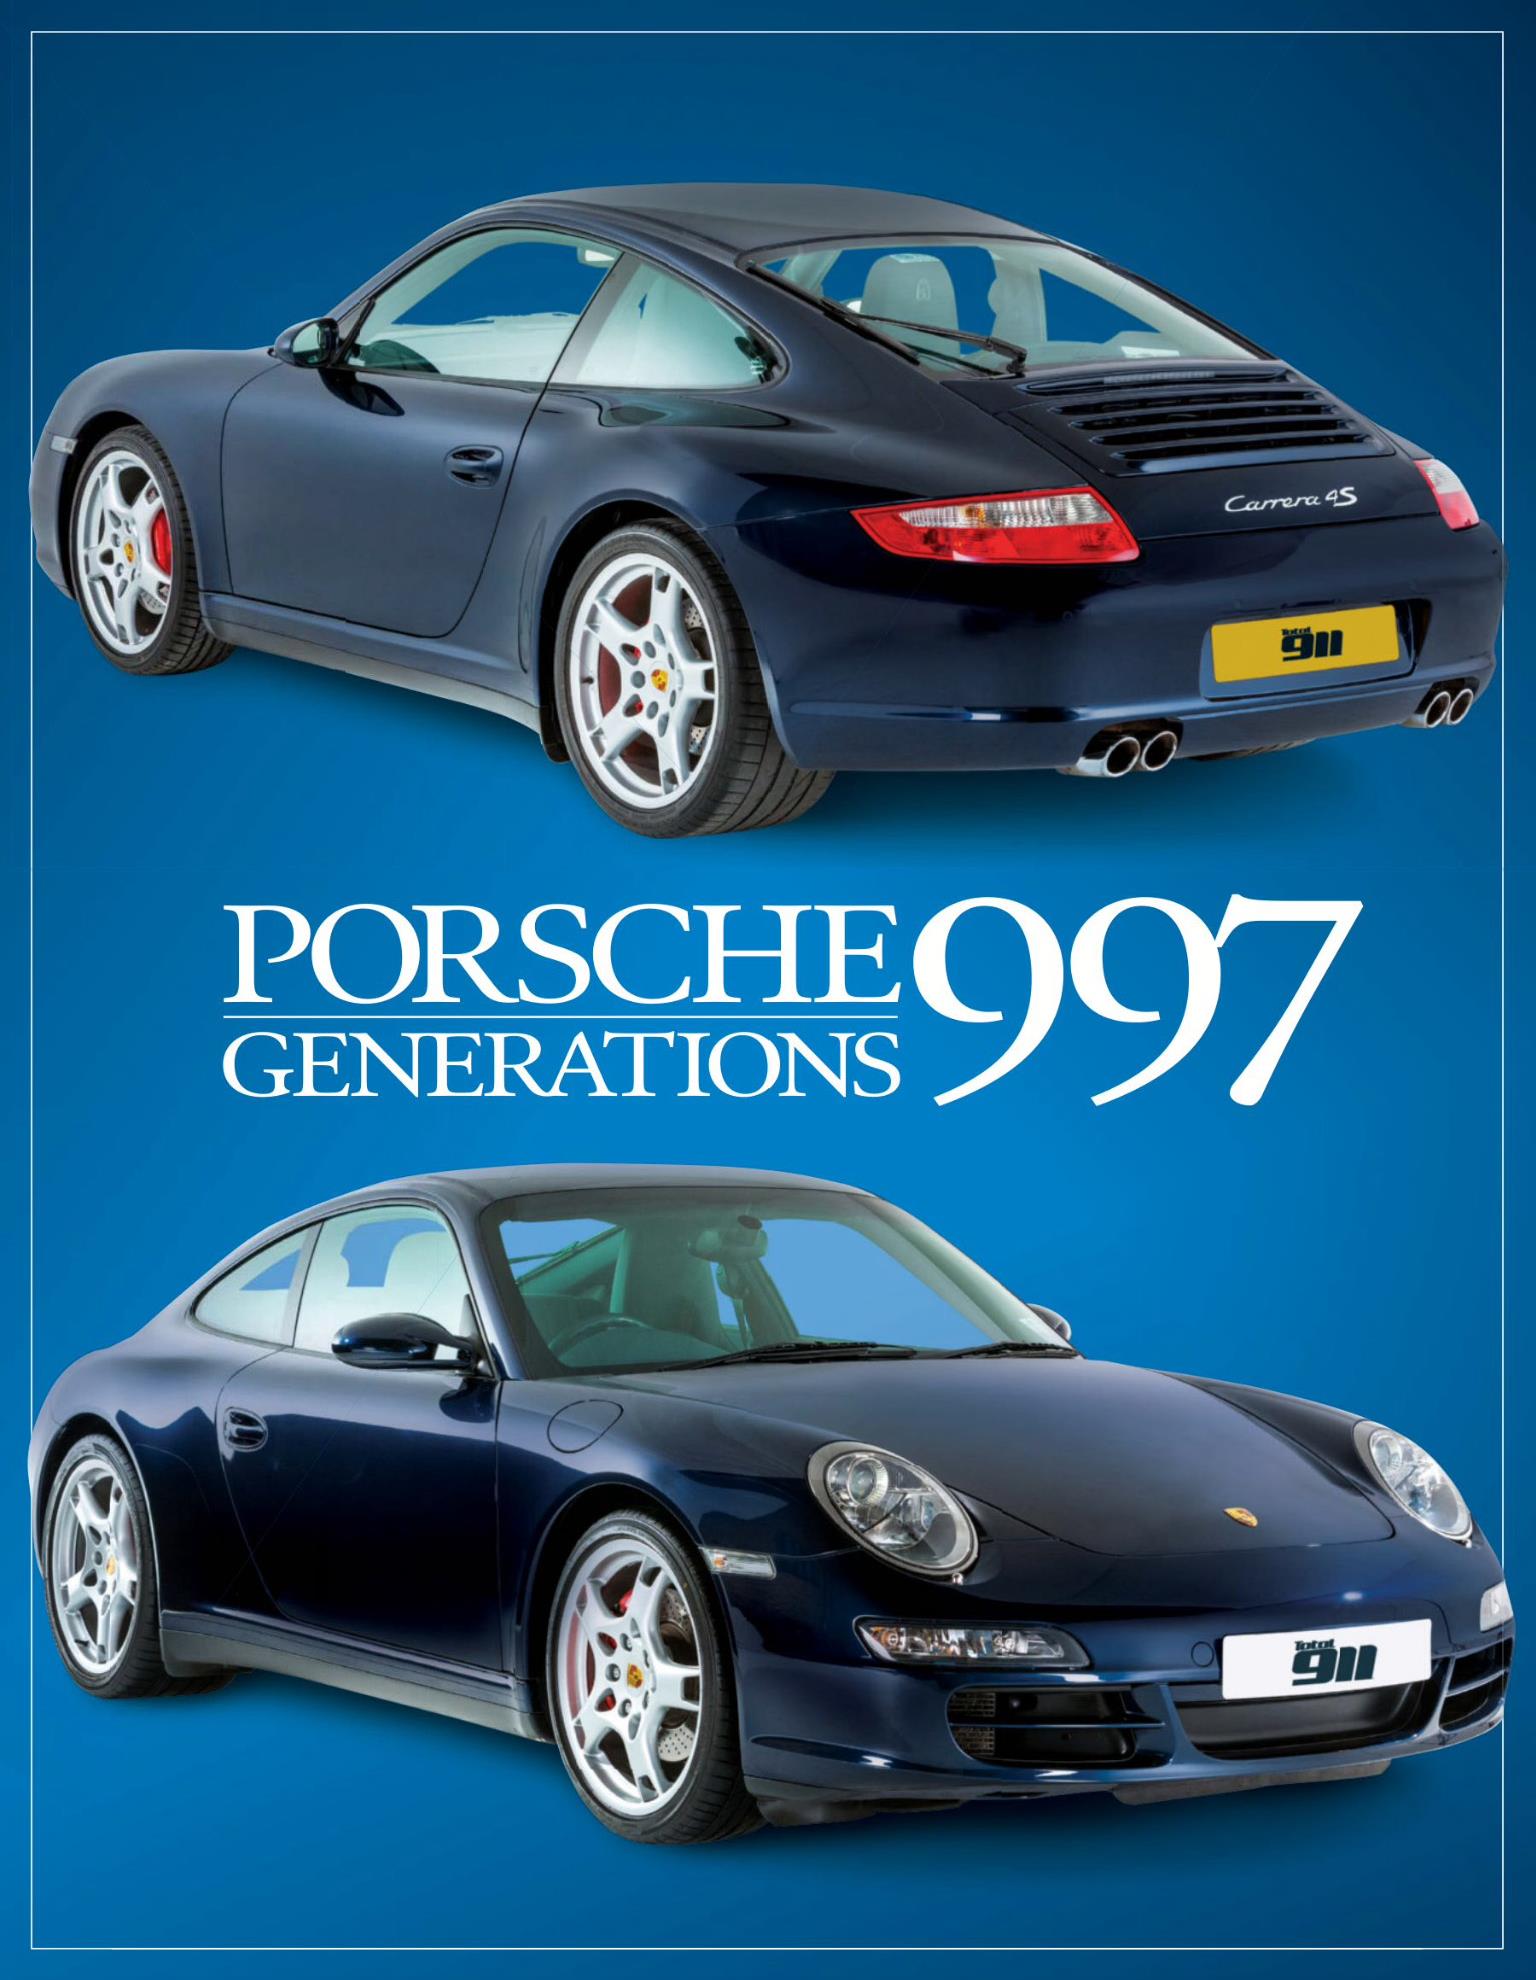 Журнал Porsche 997 generations (from the publishers of Total 911)